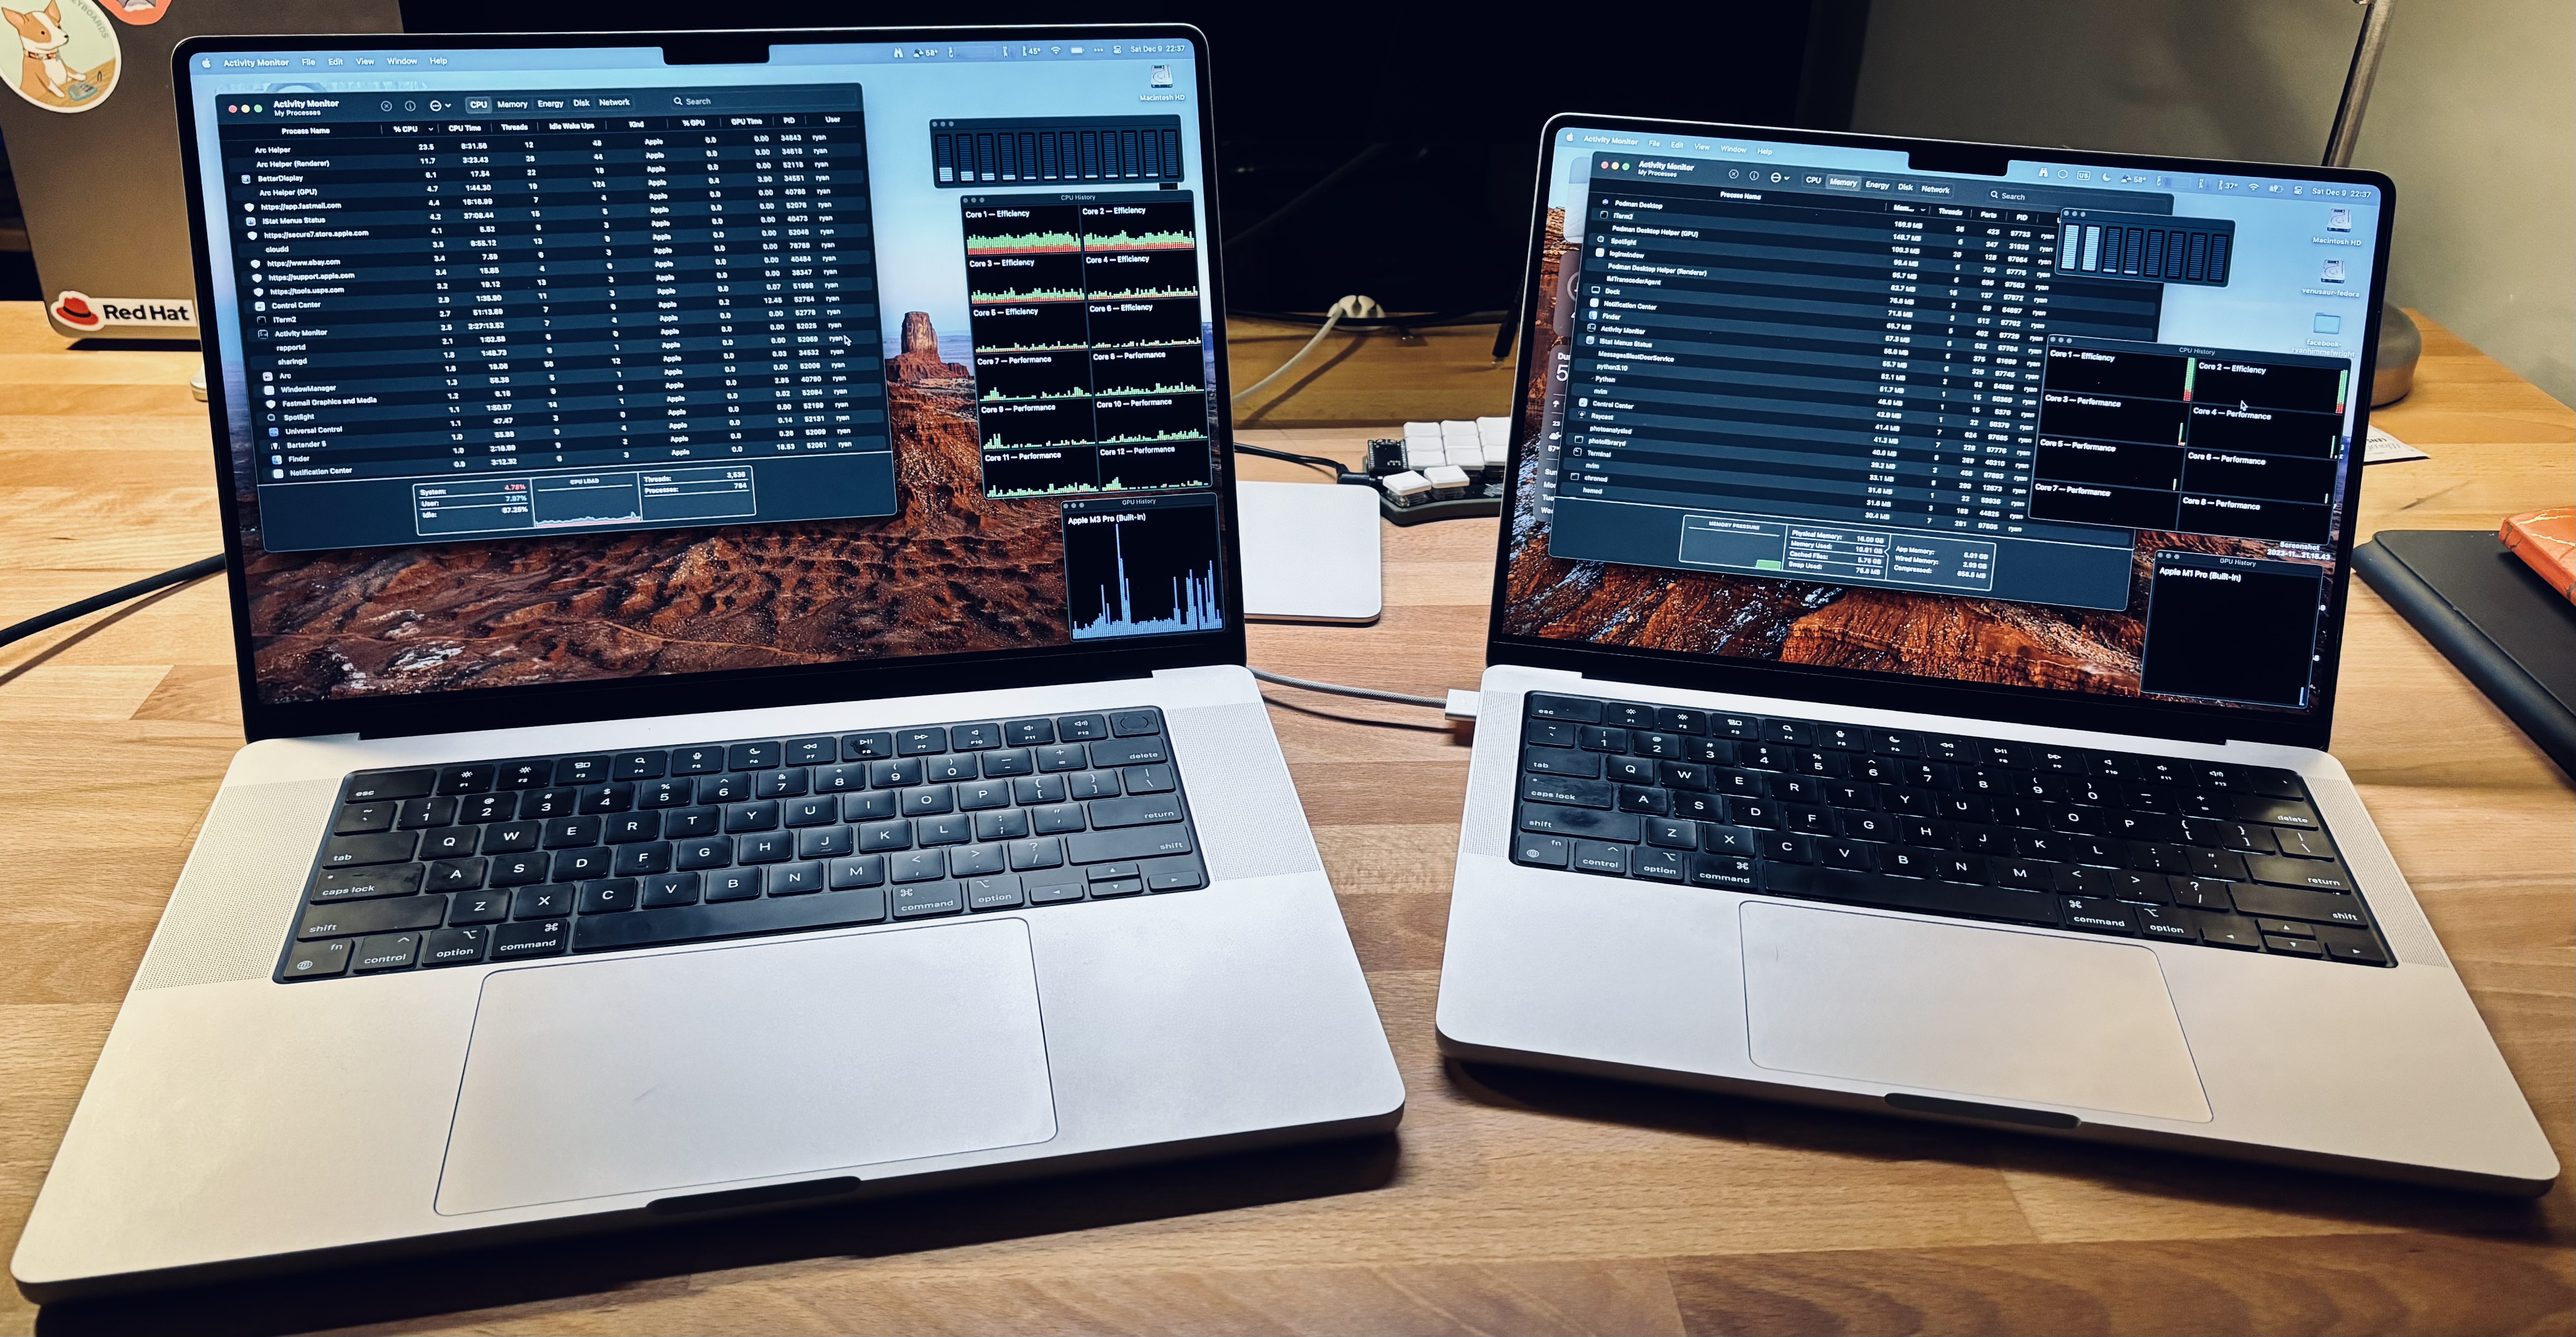 16" M3 Pro MBP on left and 14" M1 Pro MBP on right